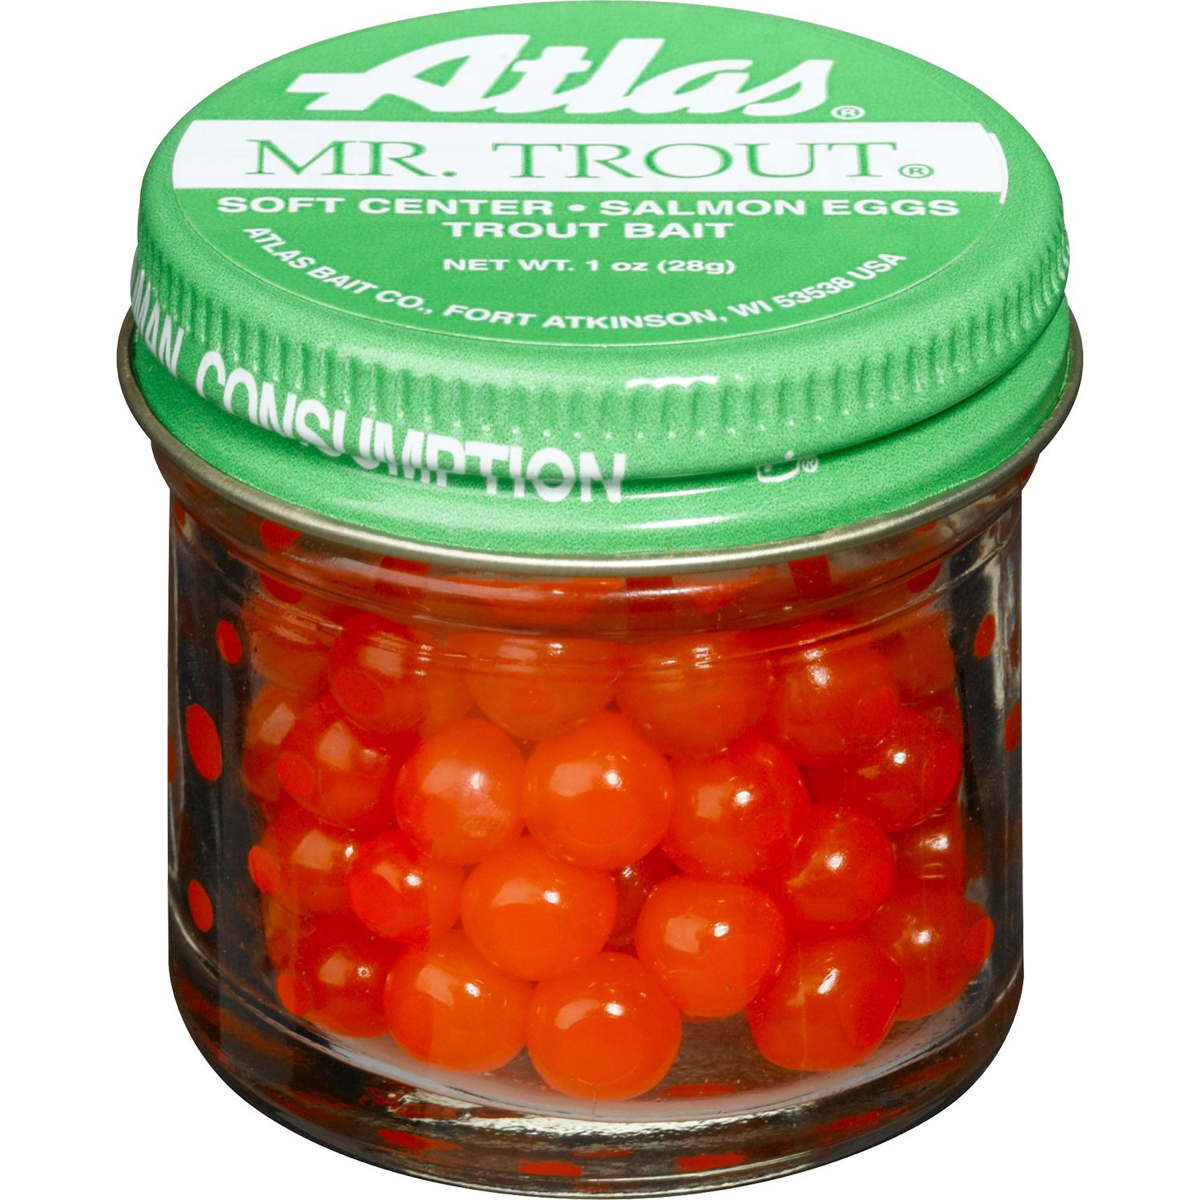 Photo of Atlas-Mike's Mr. Trout "Sugar Cured" Salmon Eggs for sale at United Tackle Shops.